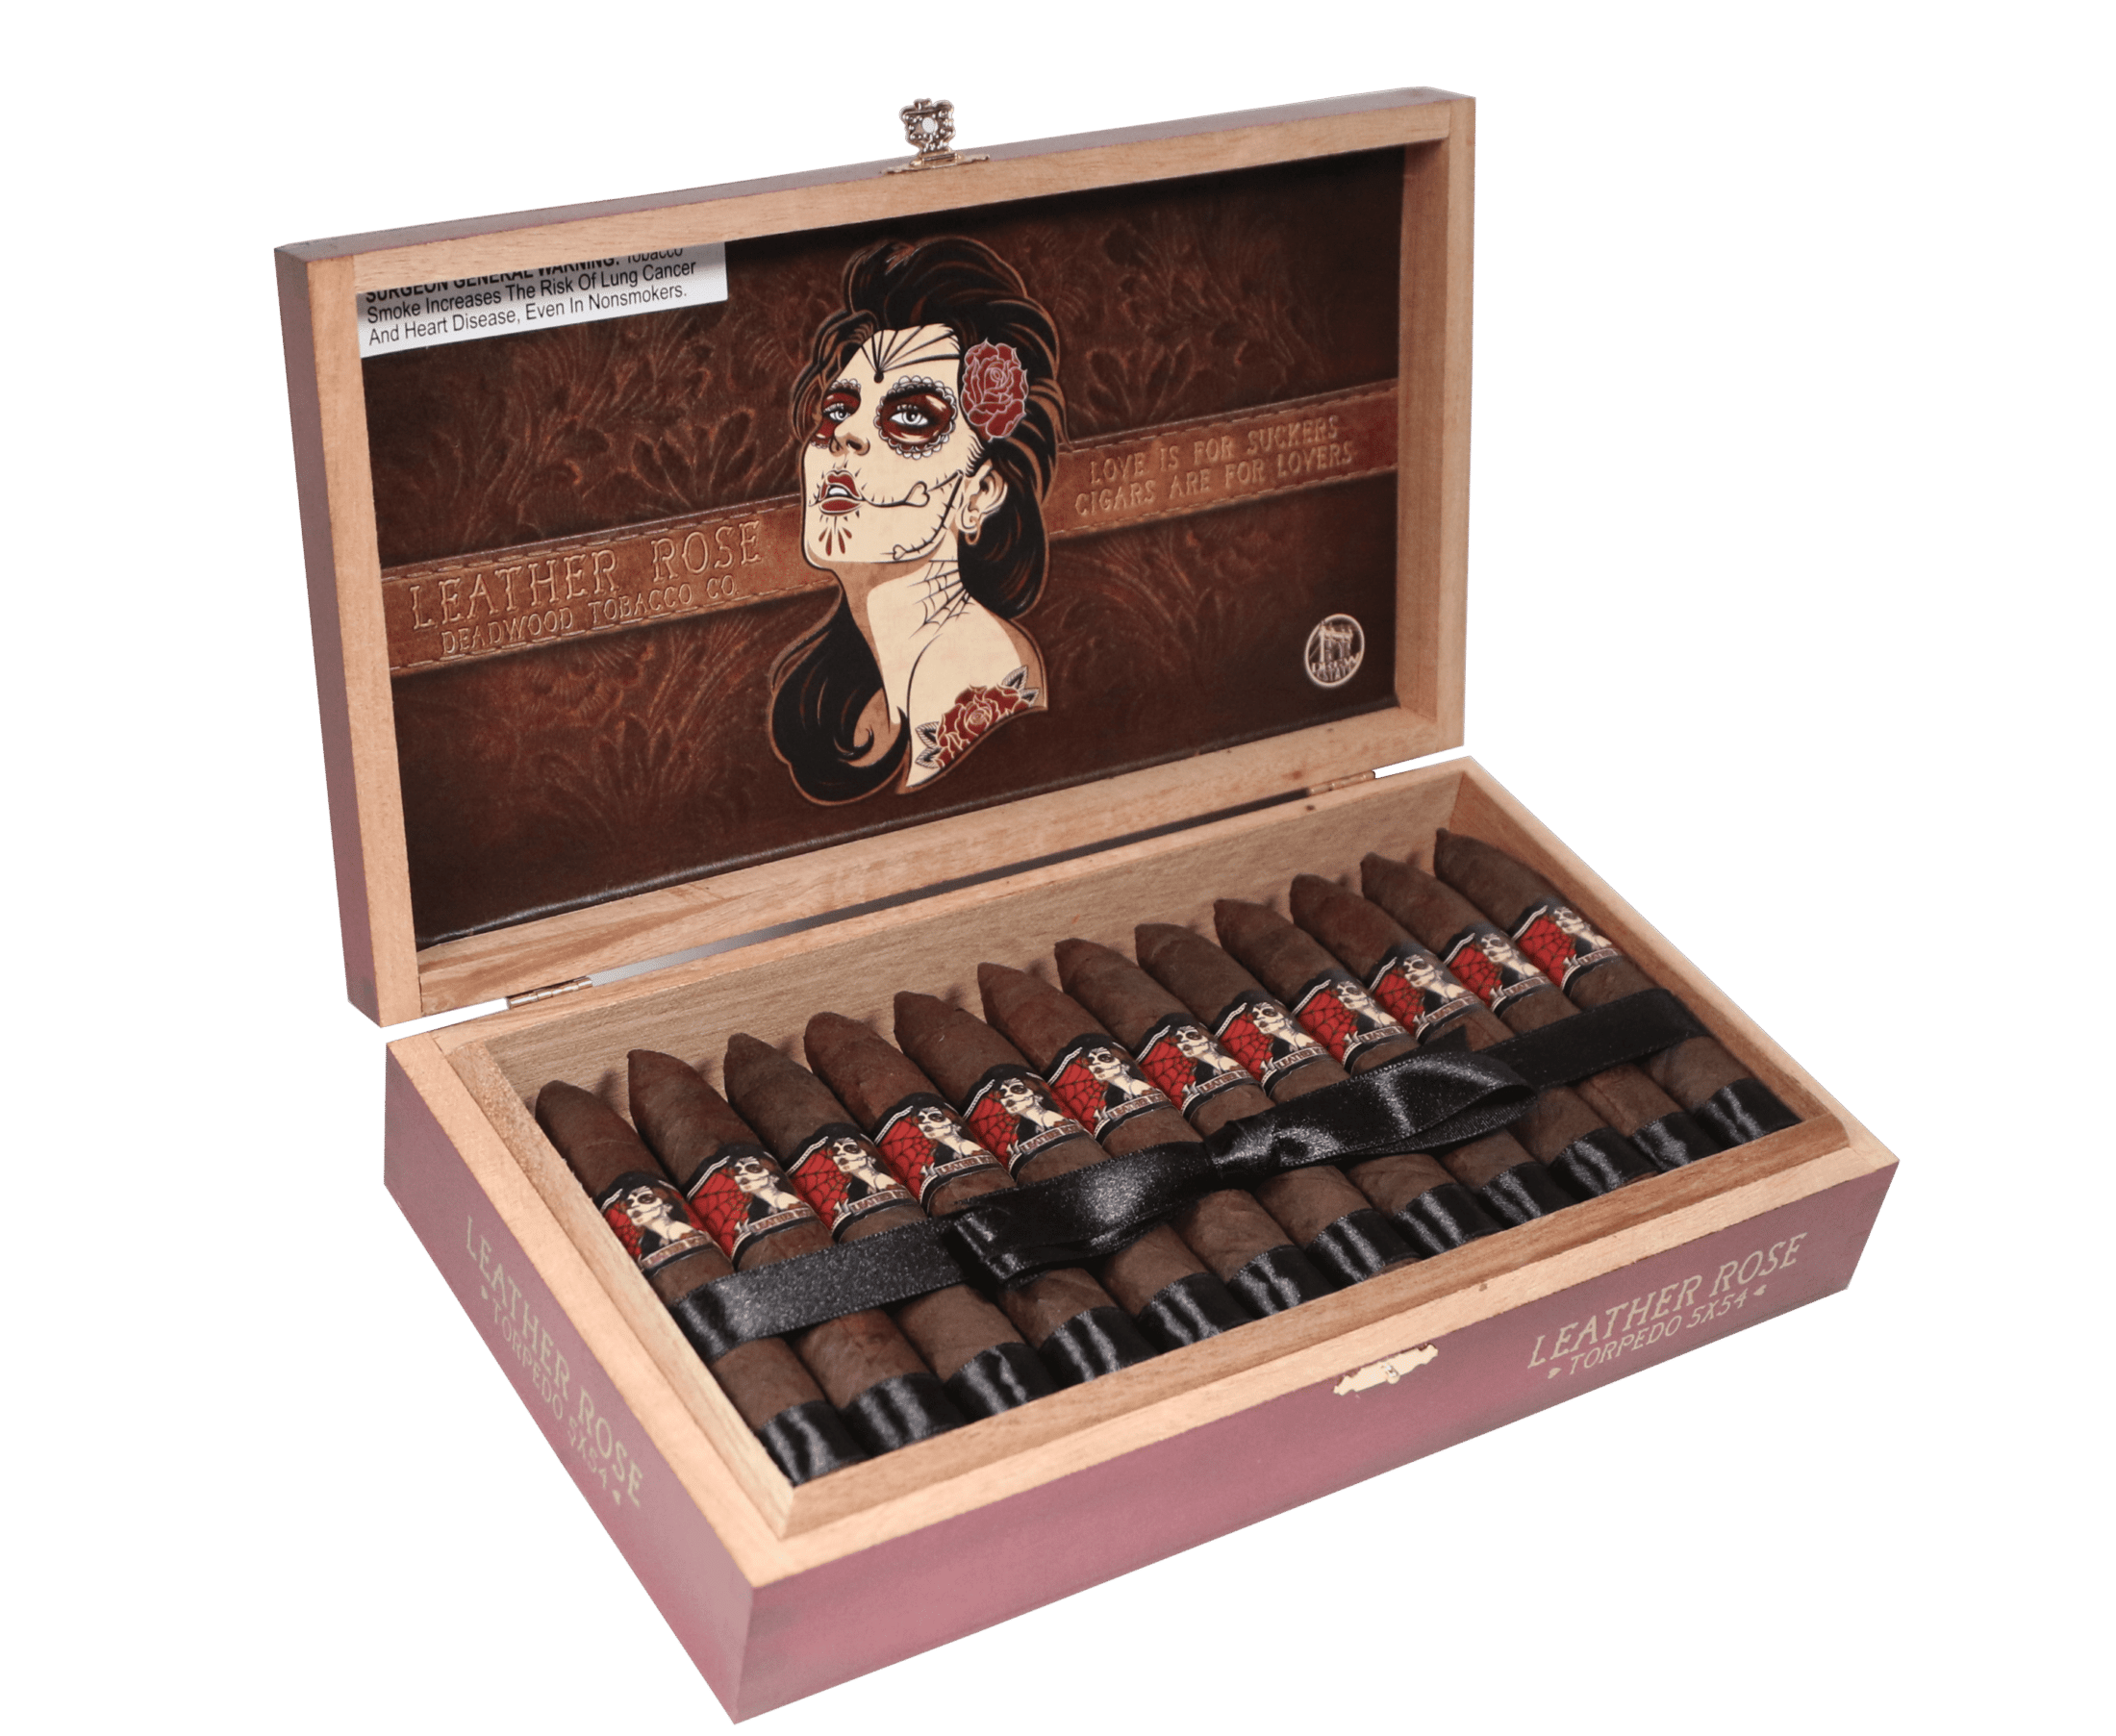 Open box of 24 count Deadwood Leather Rose cigars